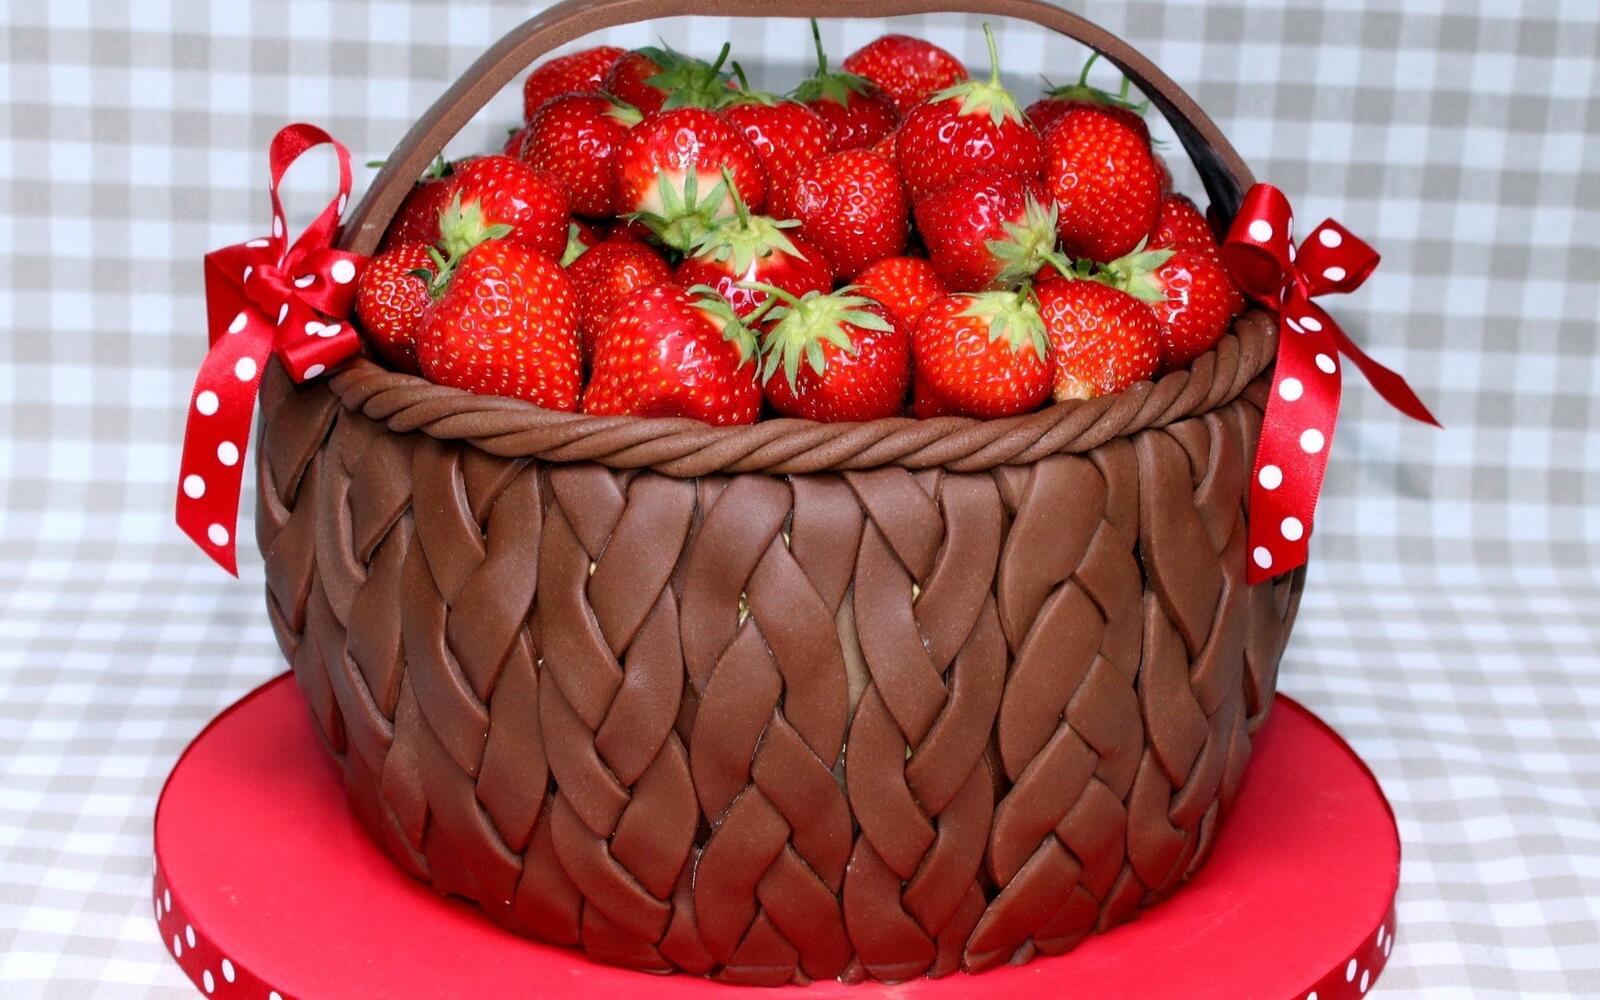 Wallpapers strawberry basket chocolate on the desktop